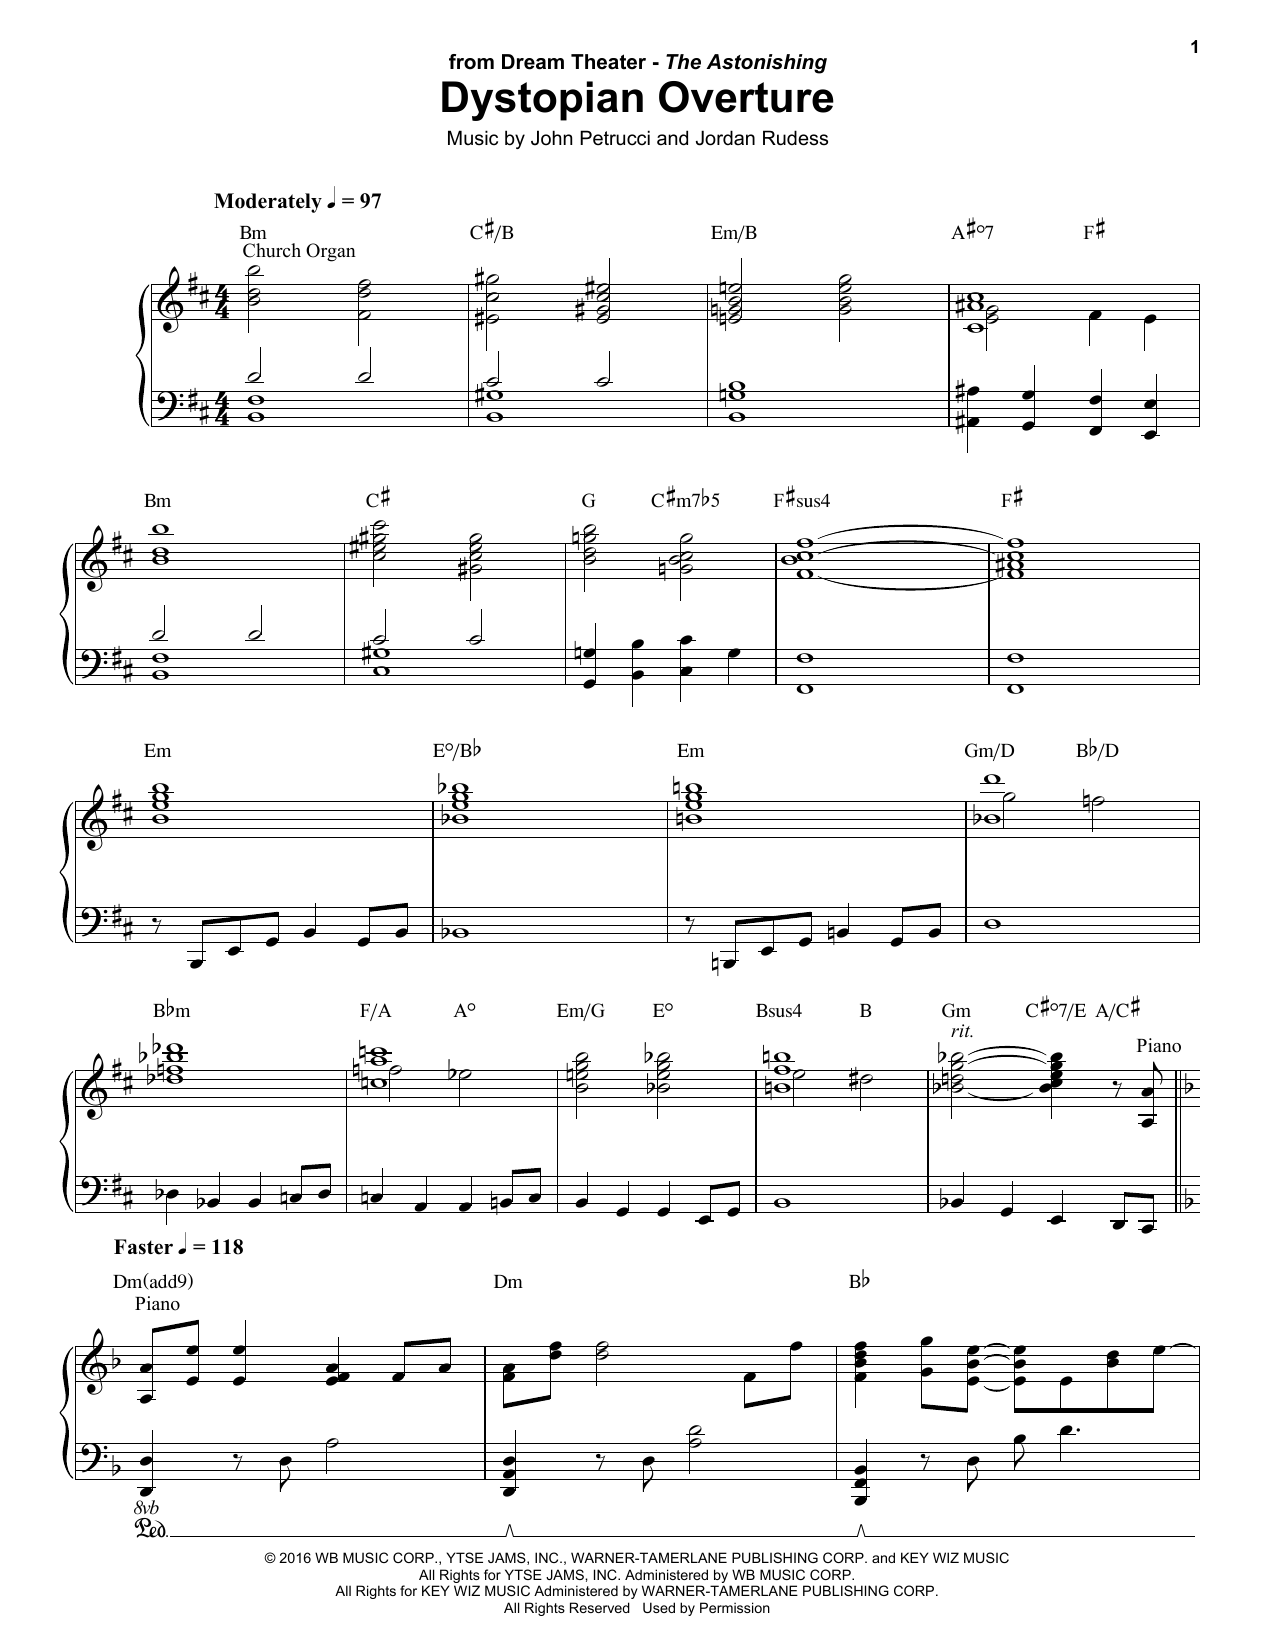 Dream Theater Dystopian Overture sheet music notes and chords. Download Printable PDF.